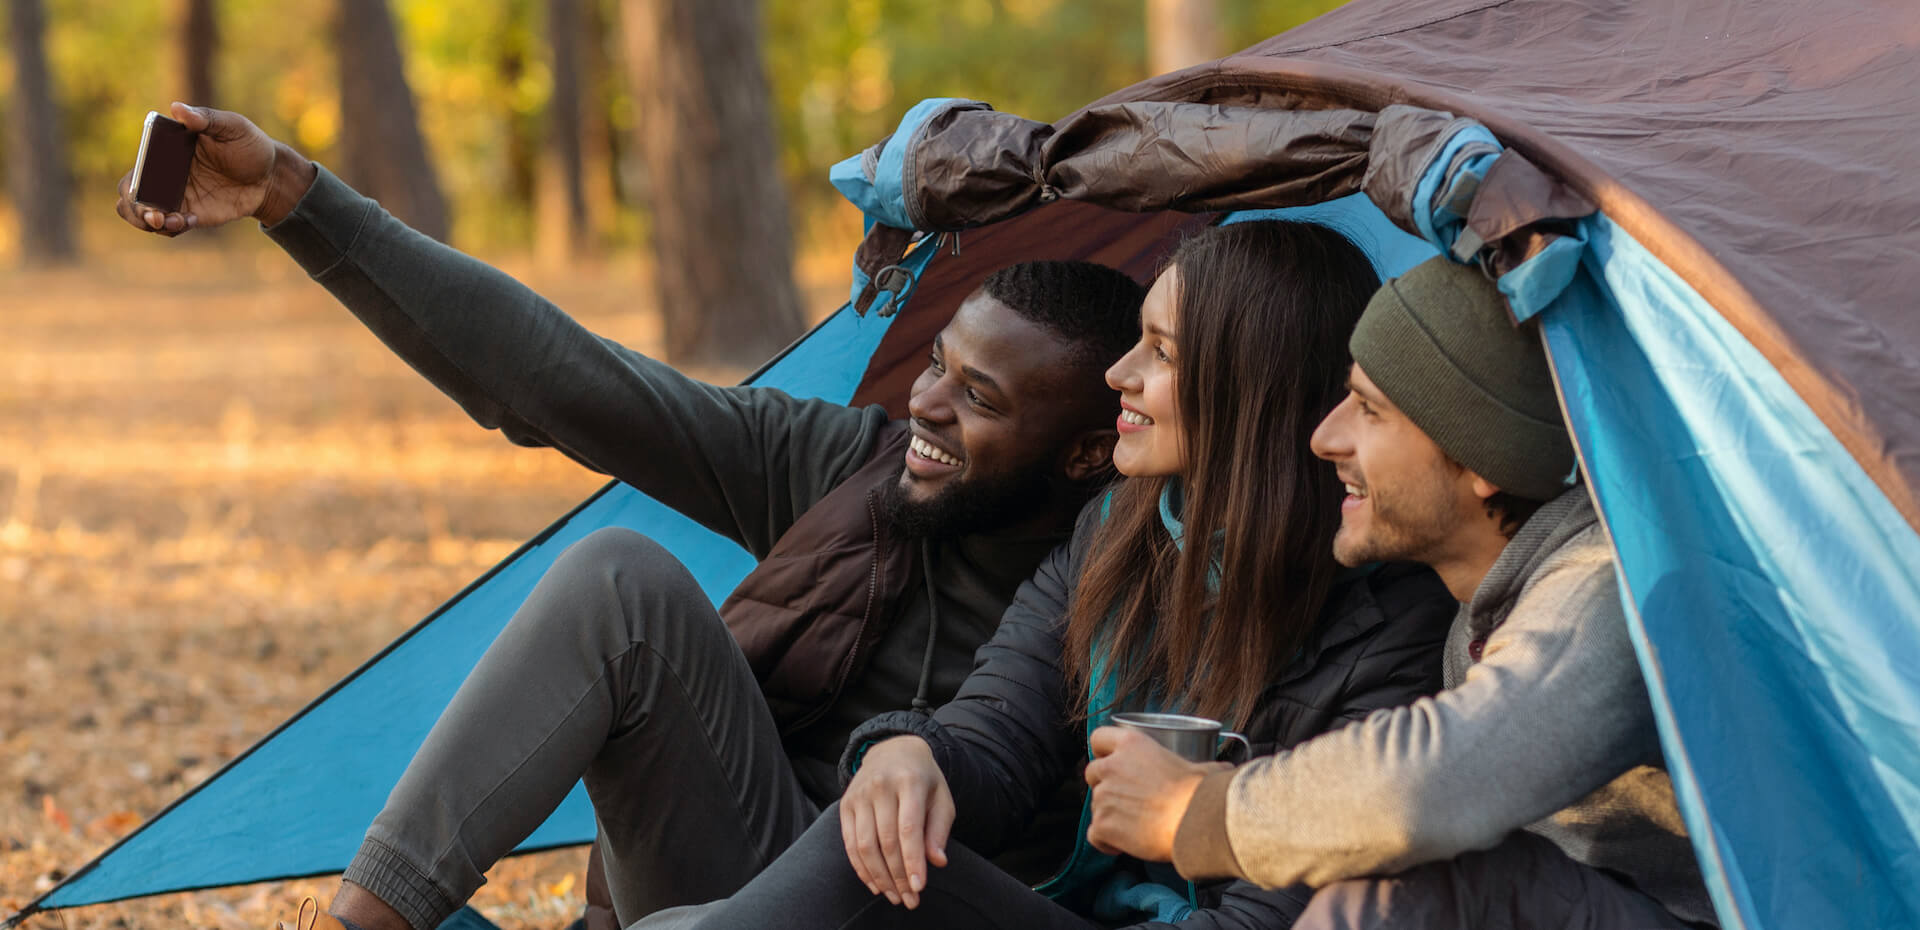 People camping outdoors
with the goal of showing freedom from glasses and contacts after SMILE eye surgery